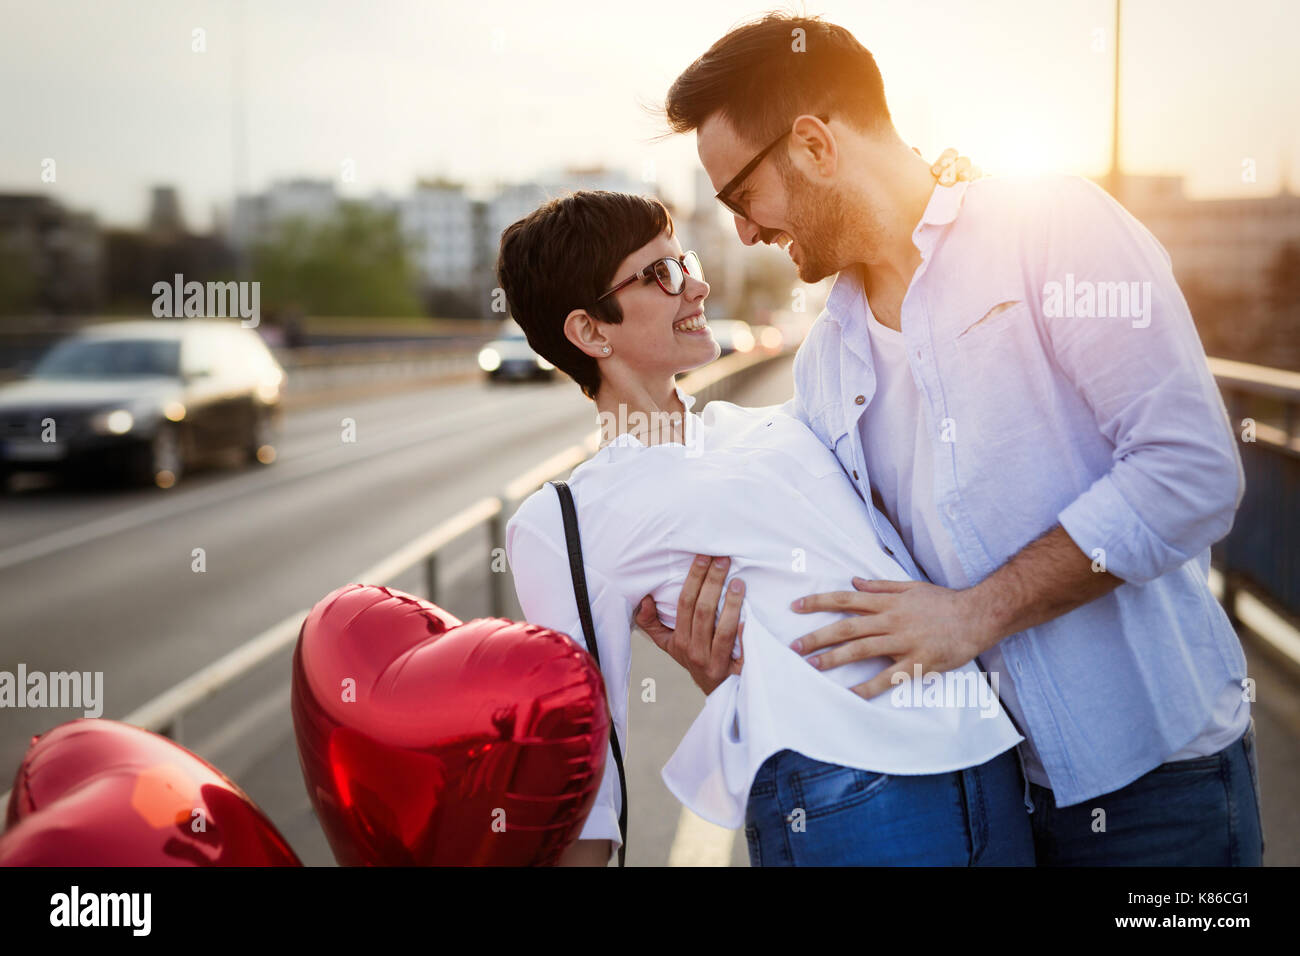 Young couple in love dating and smiling outdoor Stock Photo